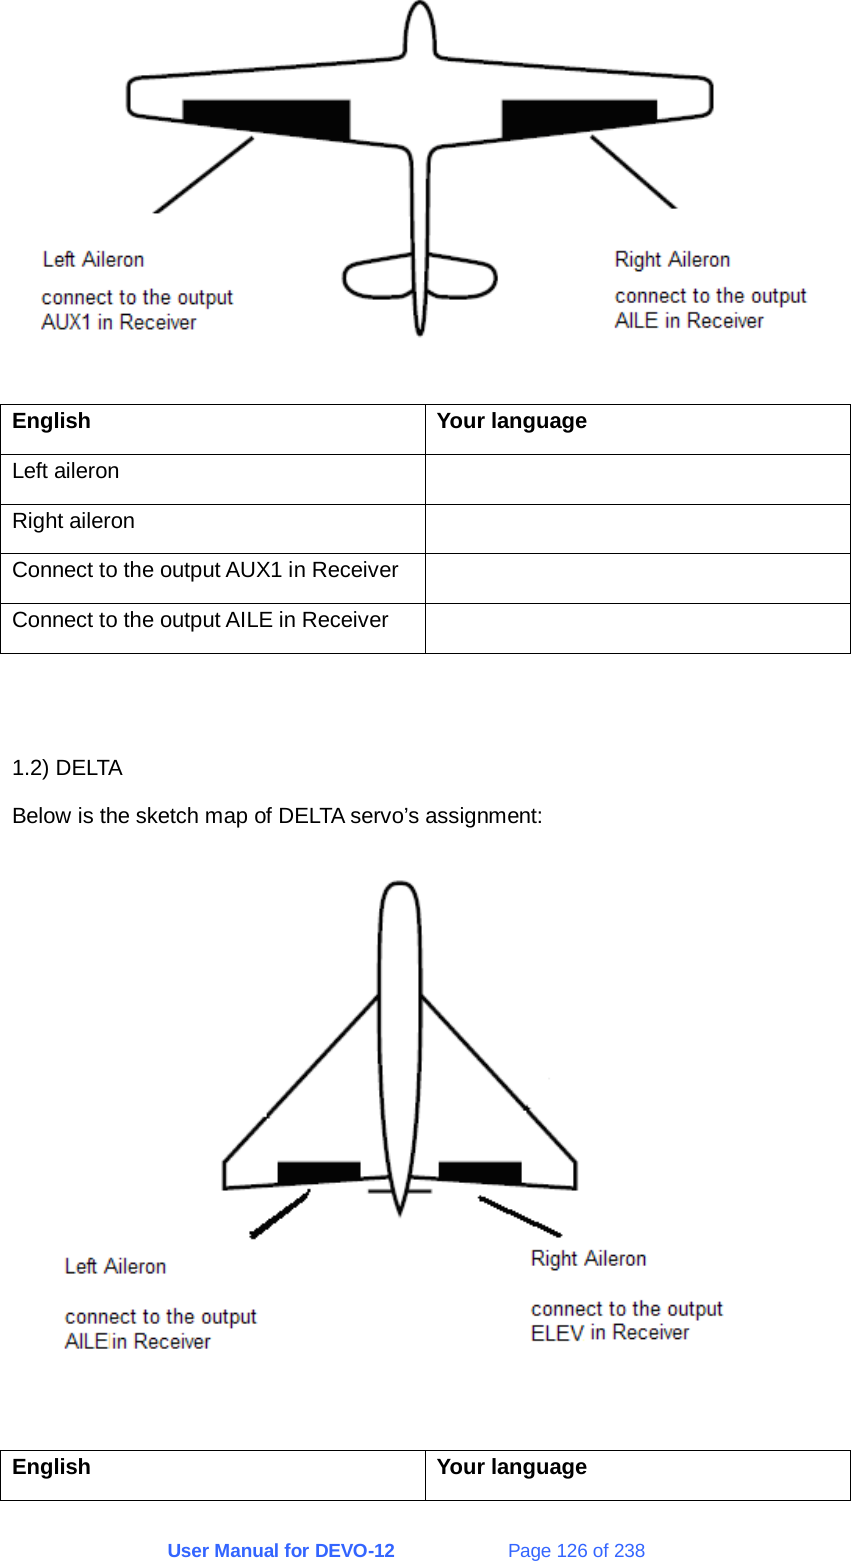 User Manual for DEVO-12             Page 126 of 238  English Your language Left aileron   Right aileron   Connect to the output AUX1 in Receiver   Connect to the output AILE in Receiver     1.2) DELTA Below is the sketch map of DELTA servo’s assignment:  English Your language 